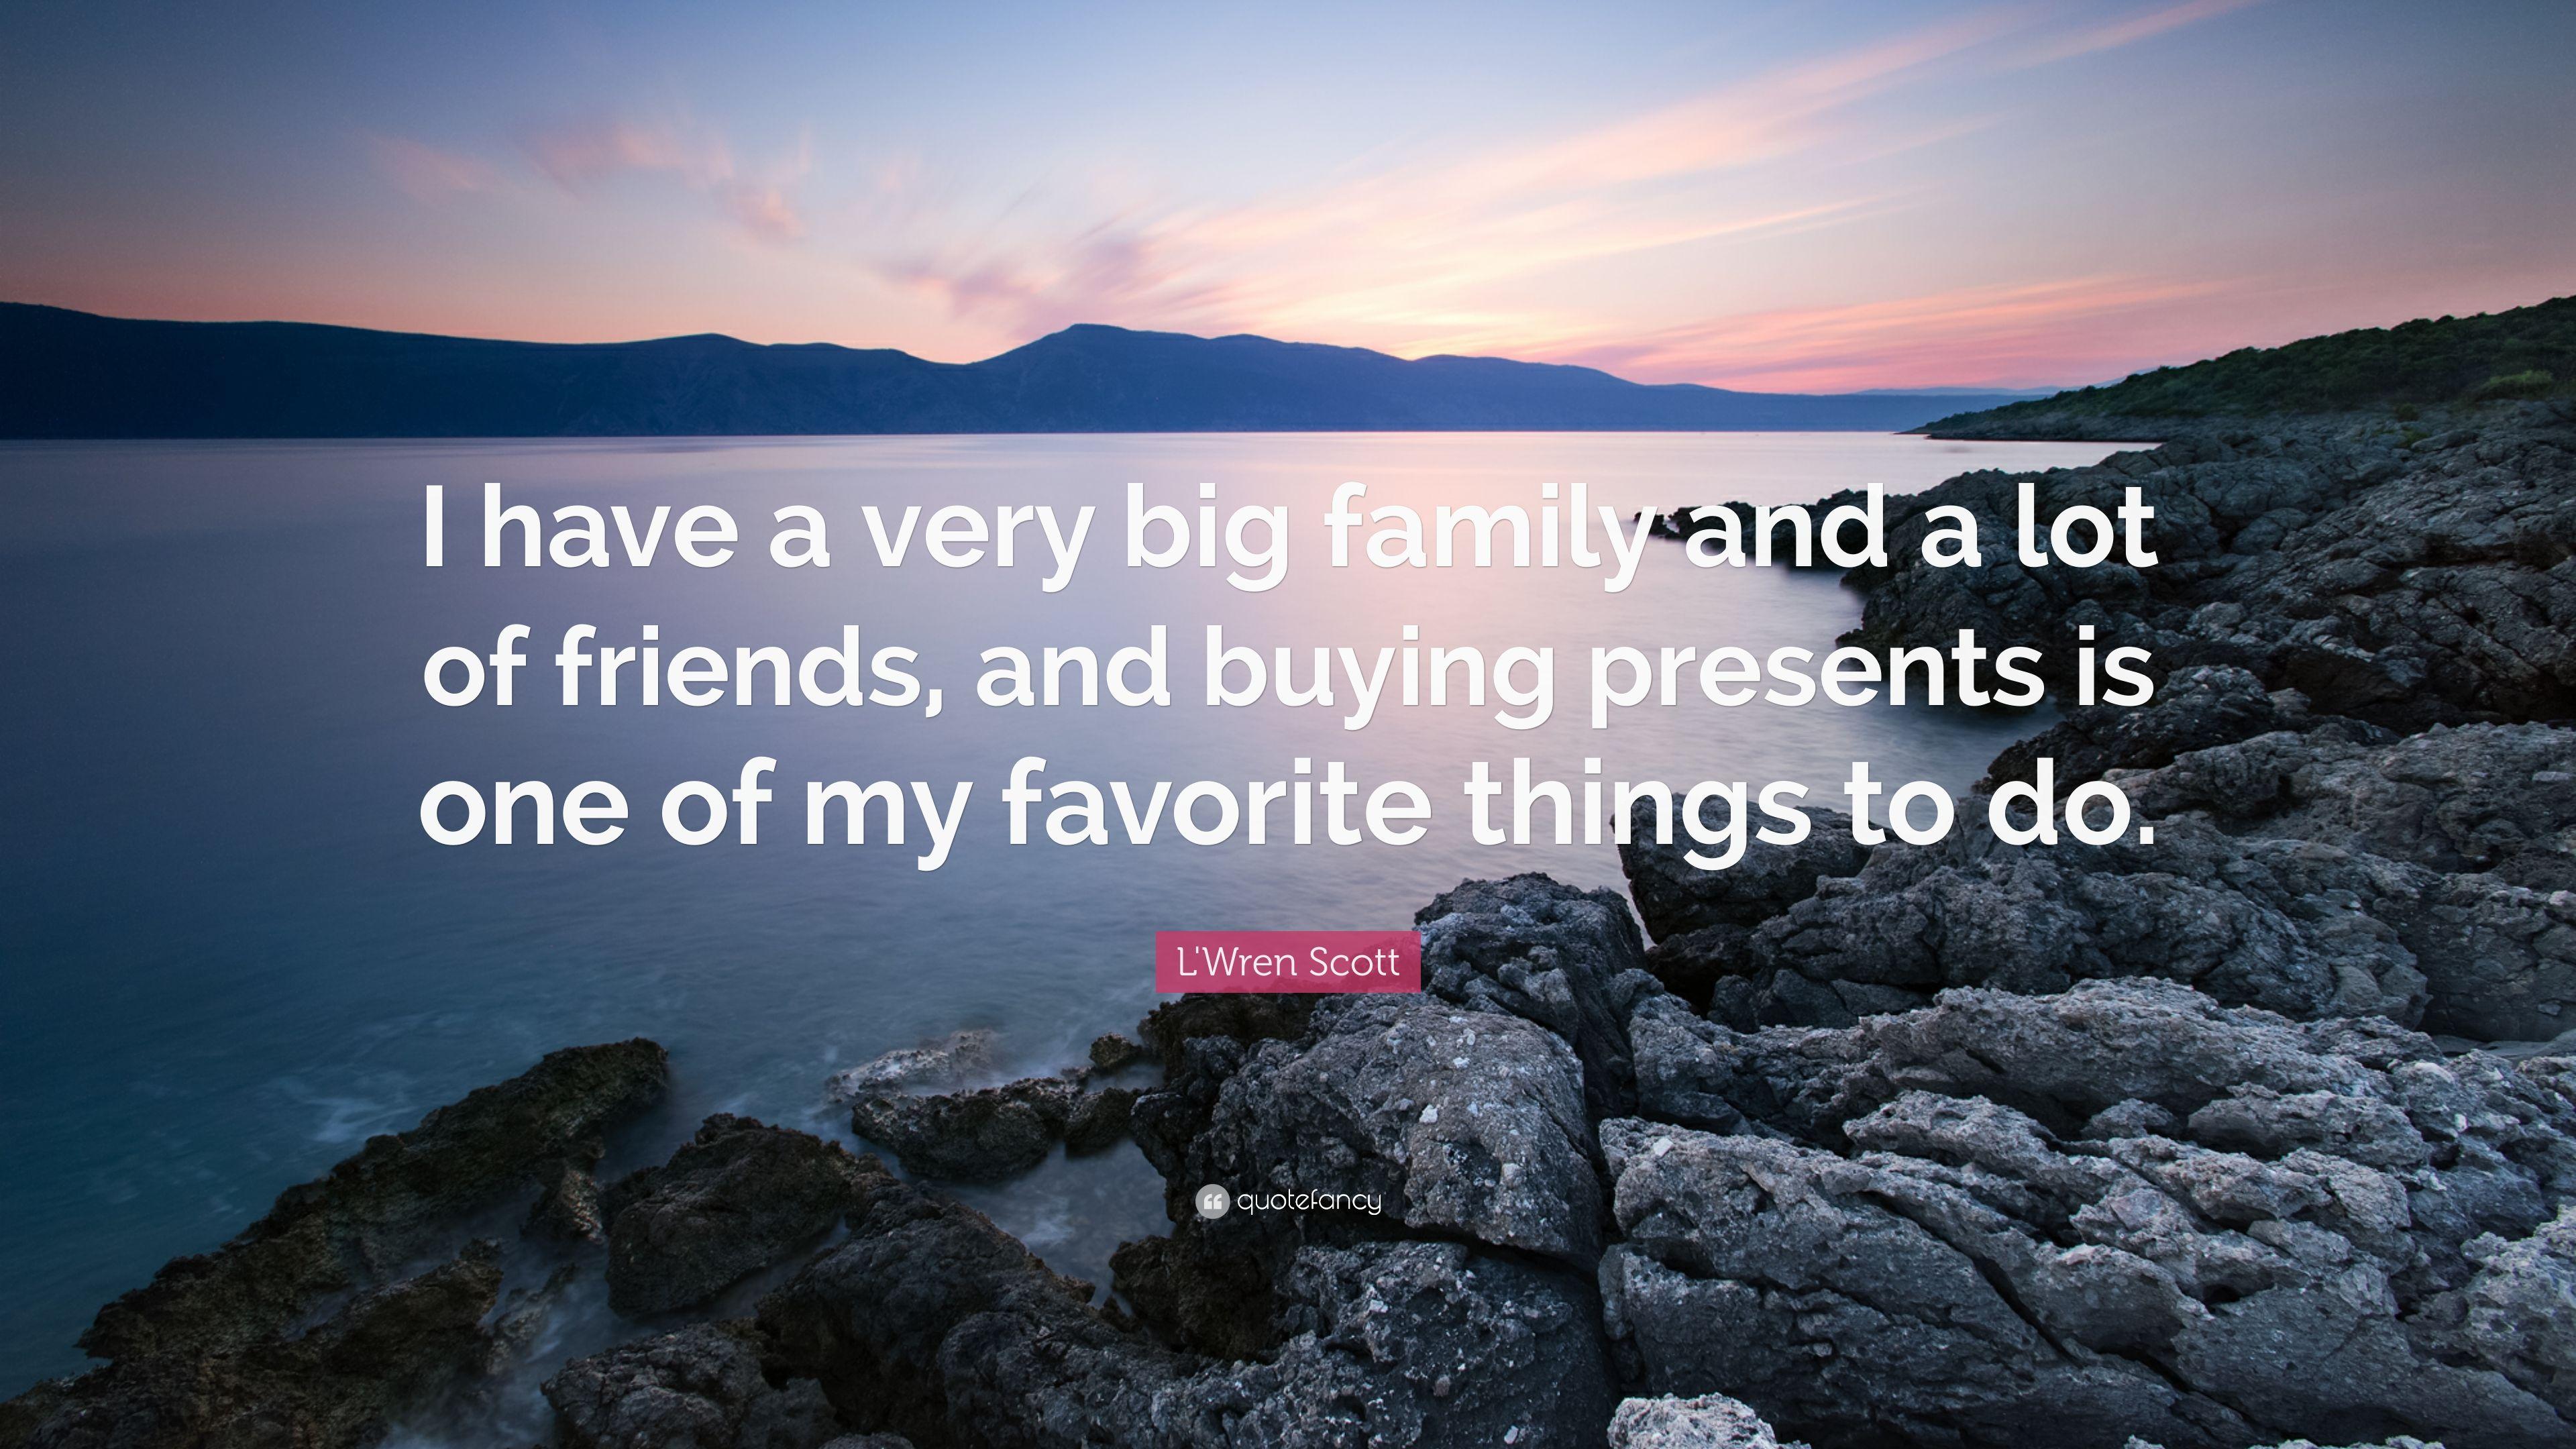 L'Wren Scott Quote: “I have a very big family and a lot